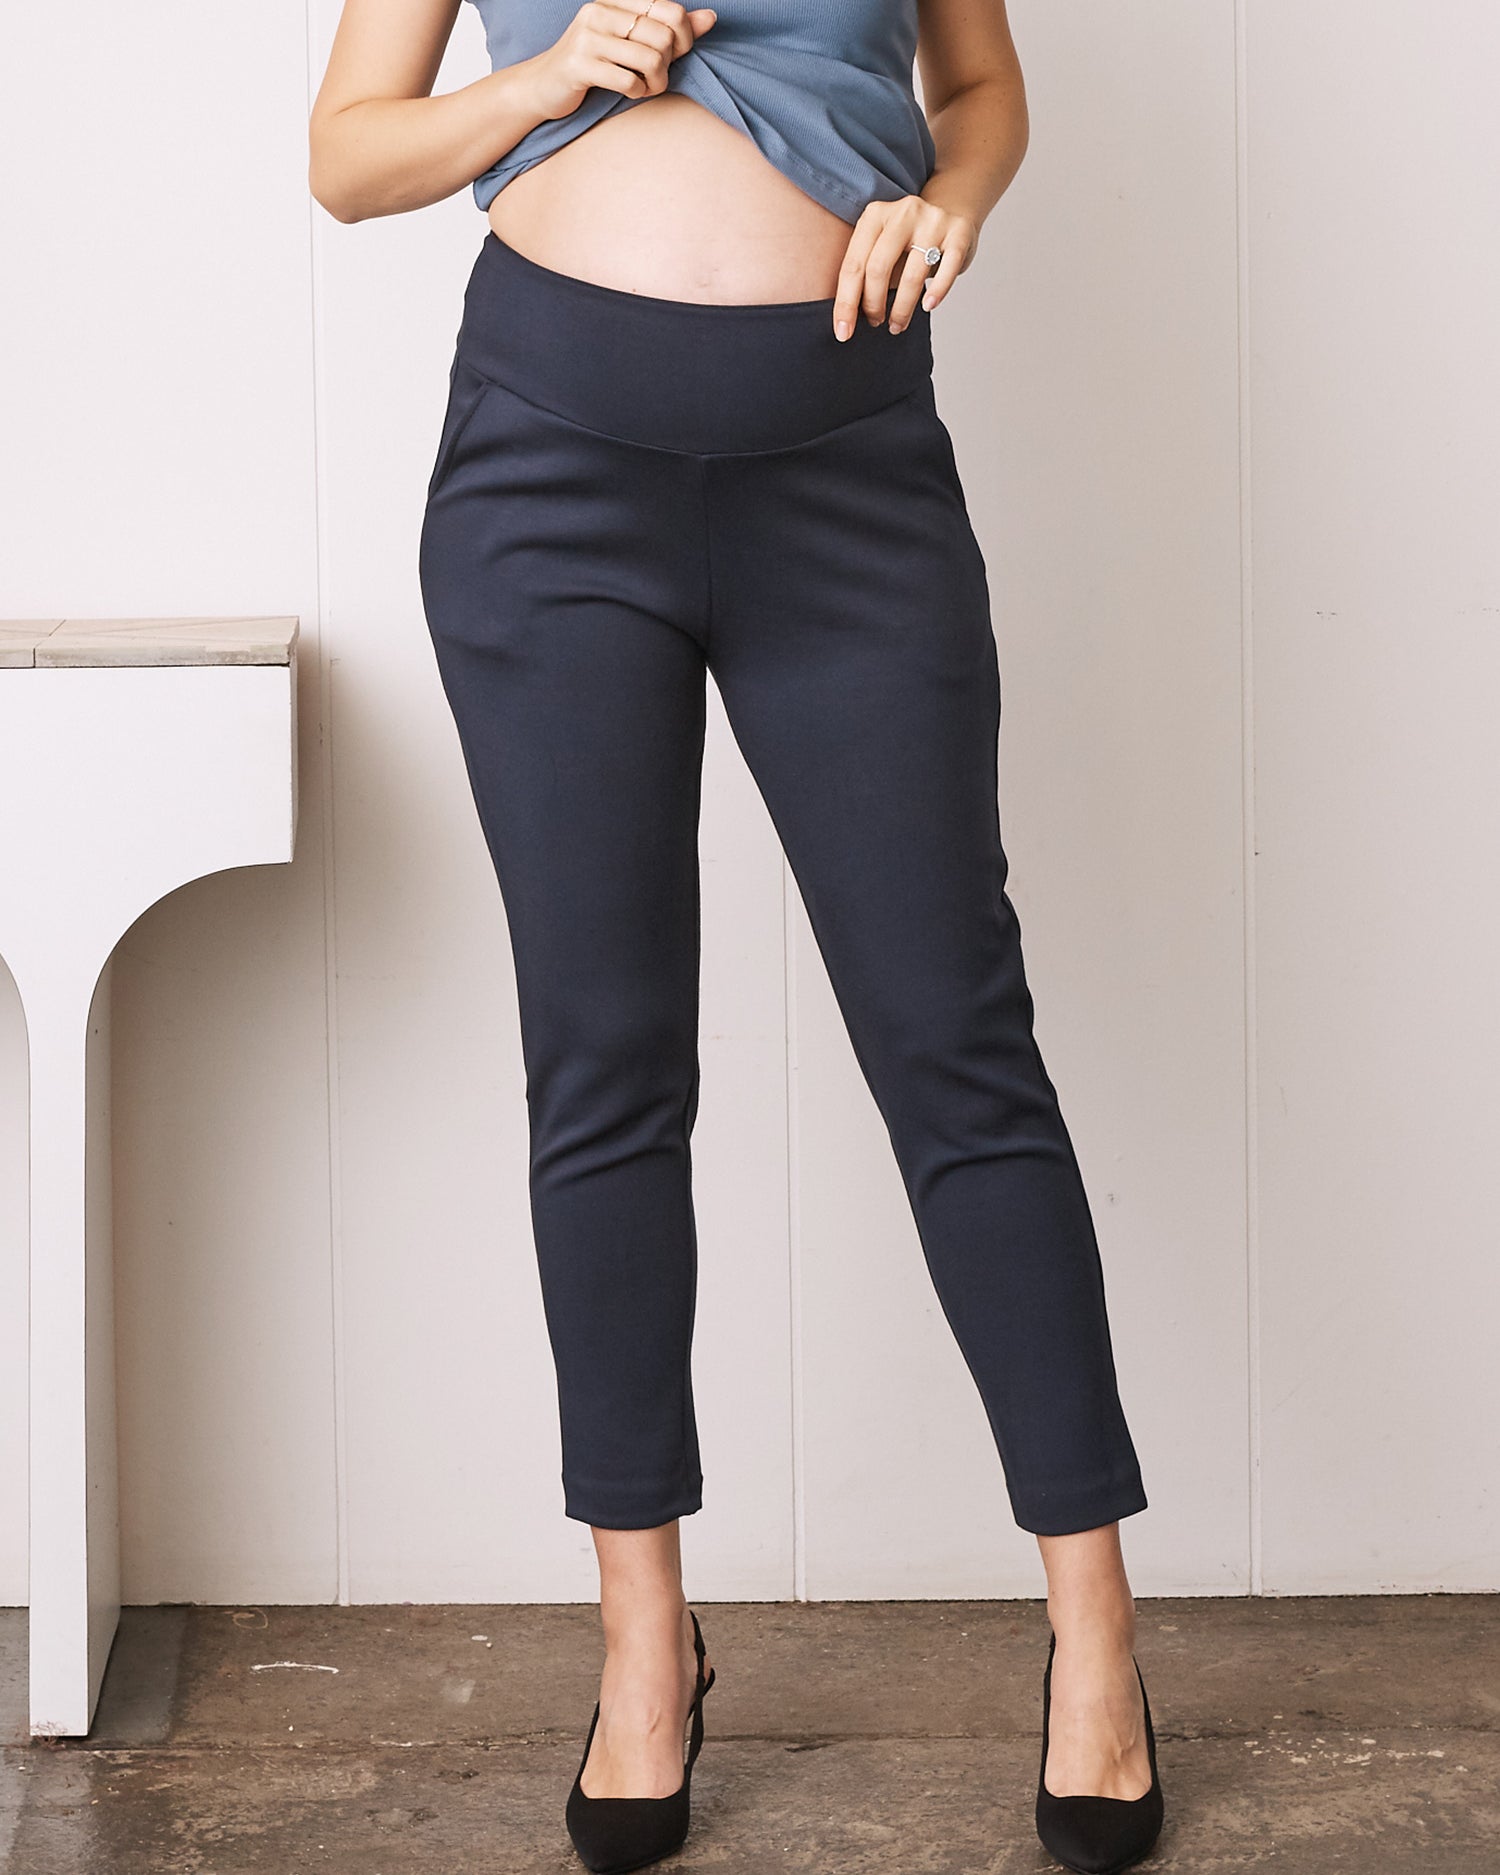 Maternity Work Pants: Power Through in Style and Comfort – ANGEL MATERNITY